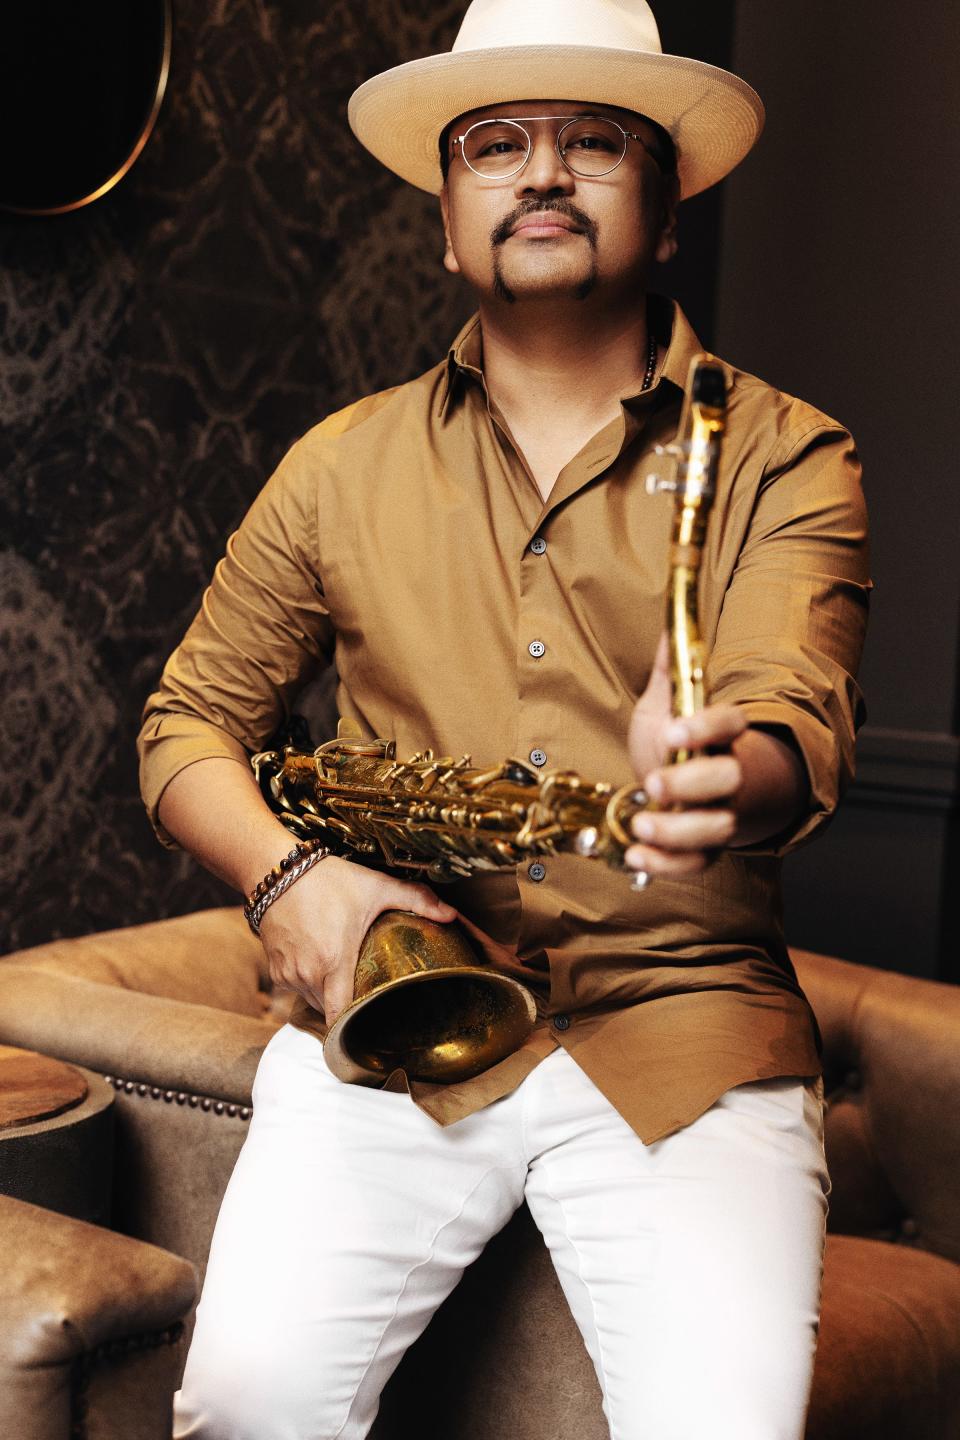 A film featuring saxophonist Jon Irabagon will kick off Jazz Appreciation Month at the Bexley Public Library Auditorium on Thursday. Irabagon also will perform there on Saturday.